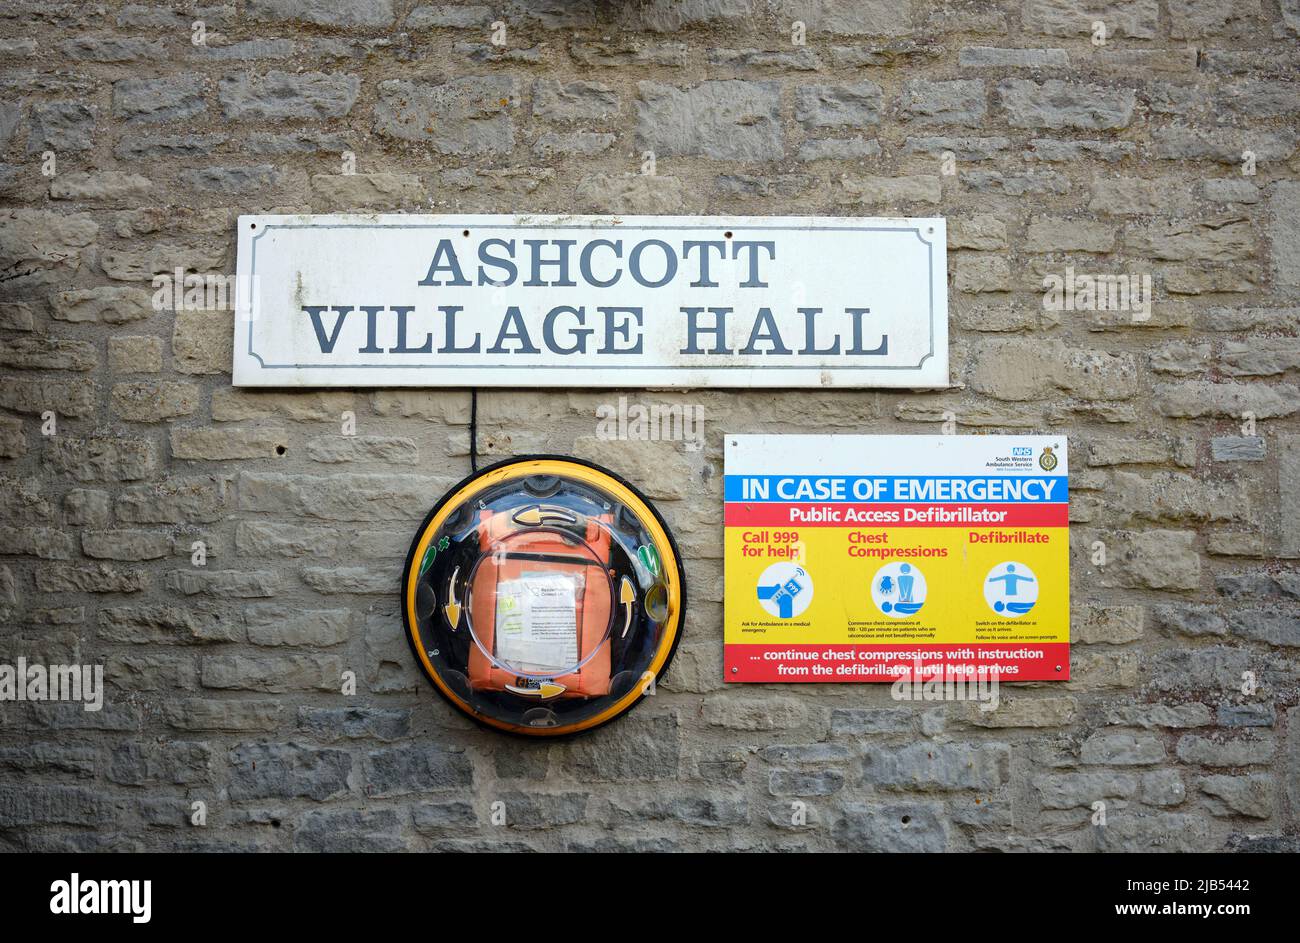 A defibrillator attached to a village hall in Somerset, England Stock Photo